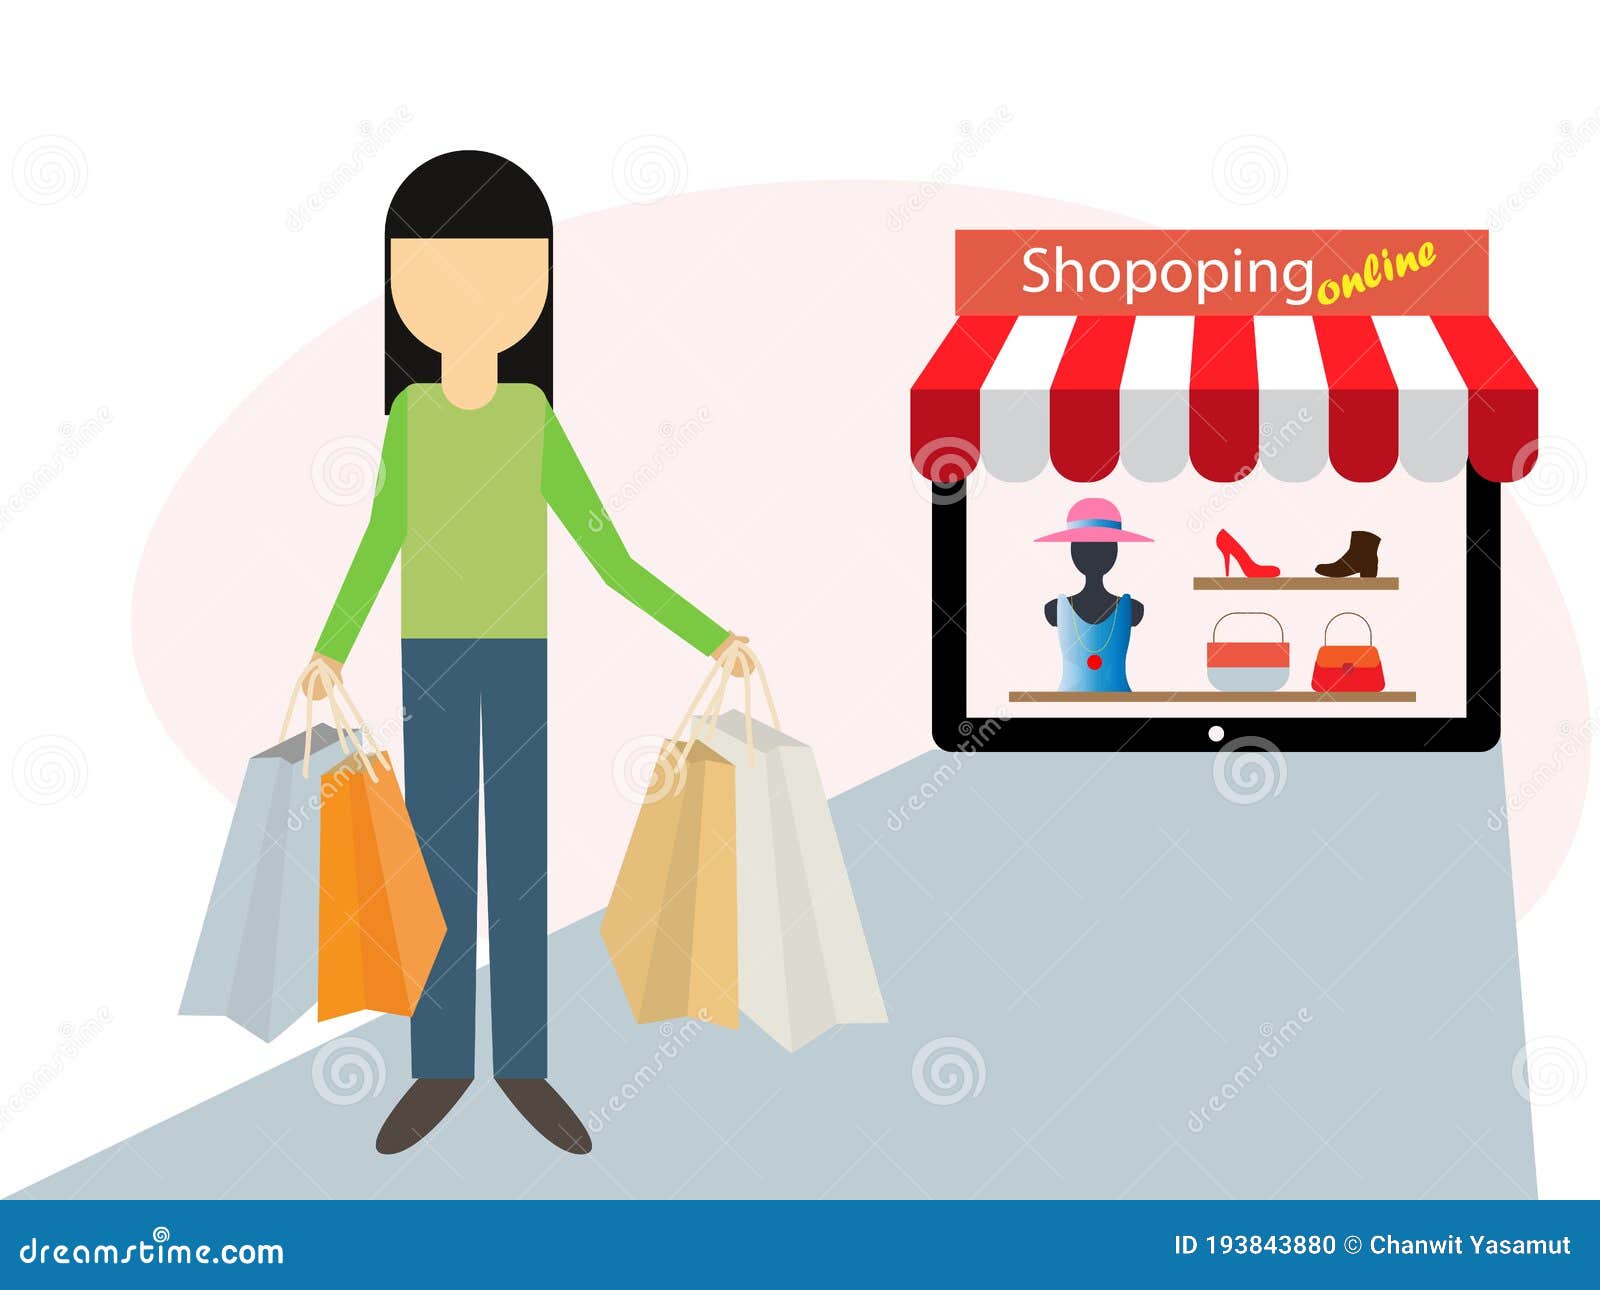 women are happy to shop online